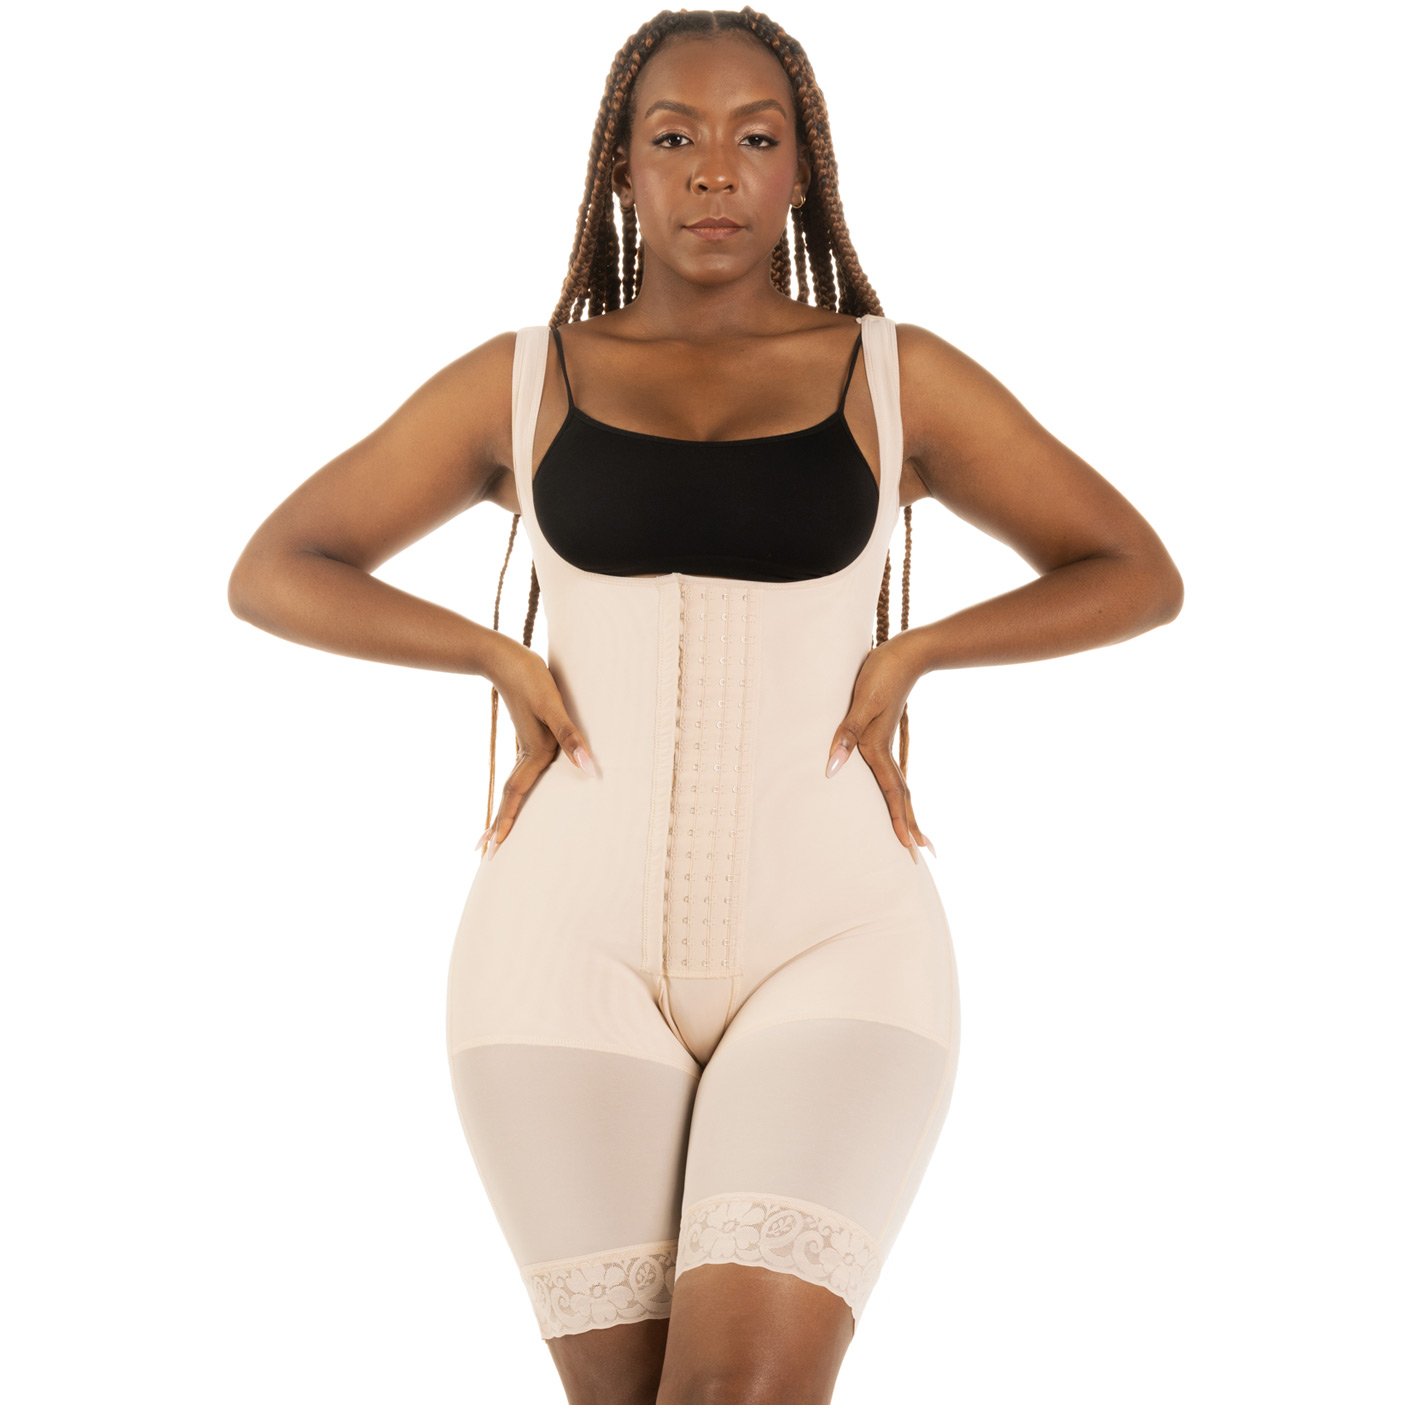  FAJAS UPLADY, LIFTS BELLY & MOLDS BOOTY, WIDE HIPS, BIG LEGS,  BOOTY/BBL - HIGH COMPRESSION WITH BUILT-IN-BRA REF 6189 (6XL, BEIGE) :  Clothing, Shoes & Jewelry